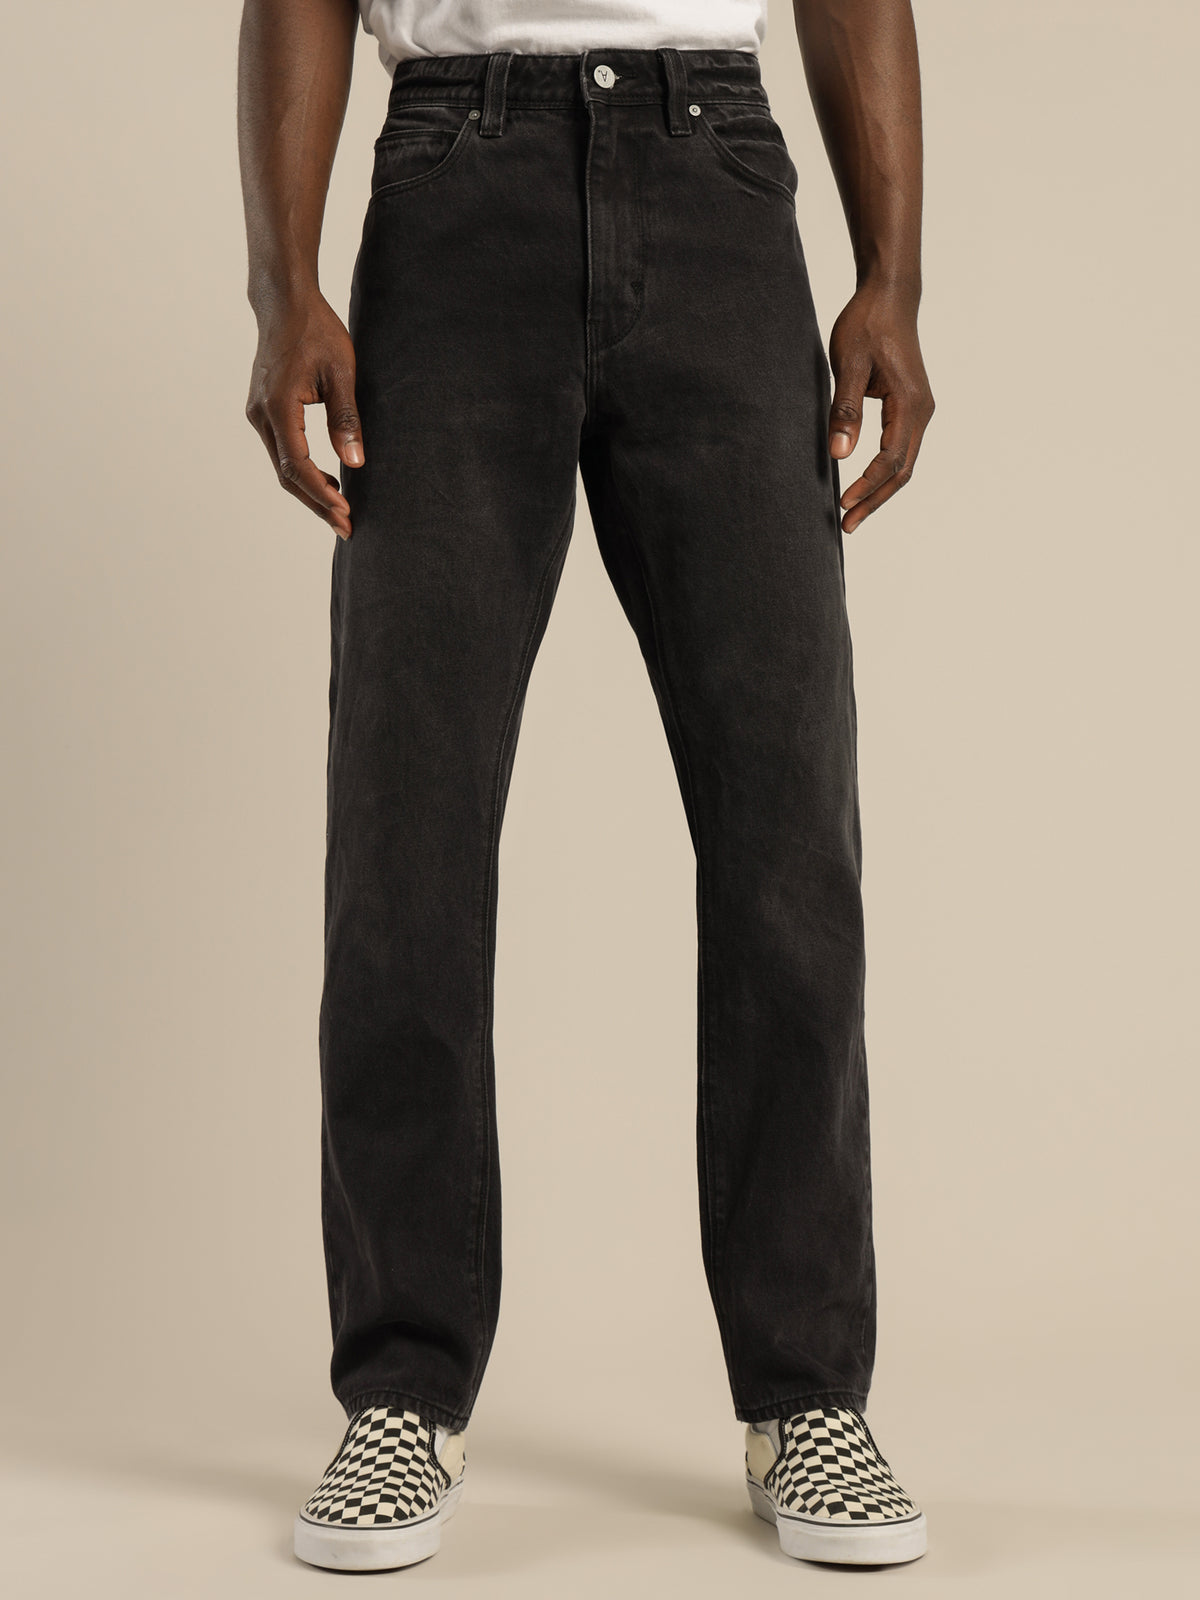 A Straight Nu Wave Jeans in Black